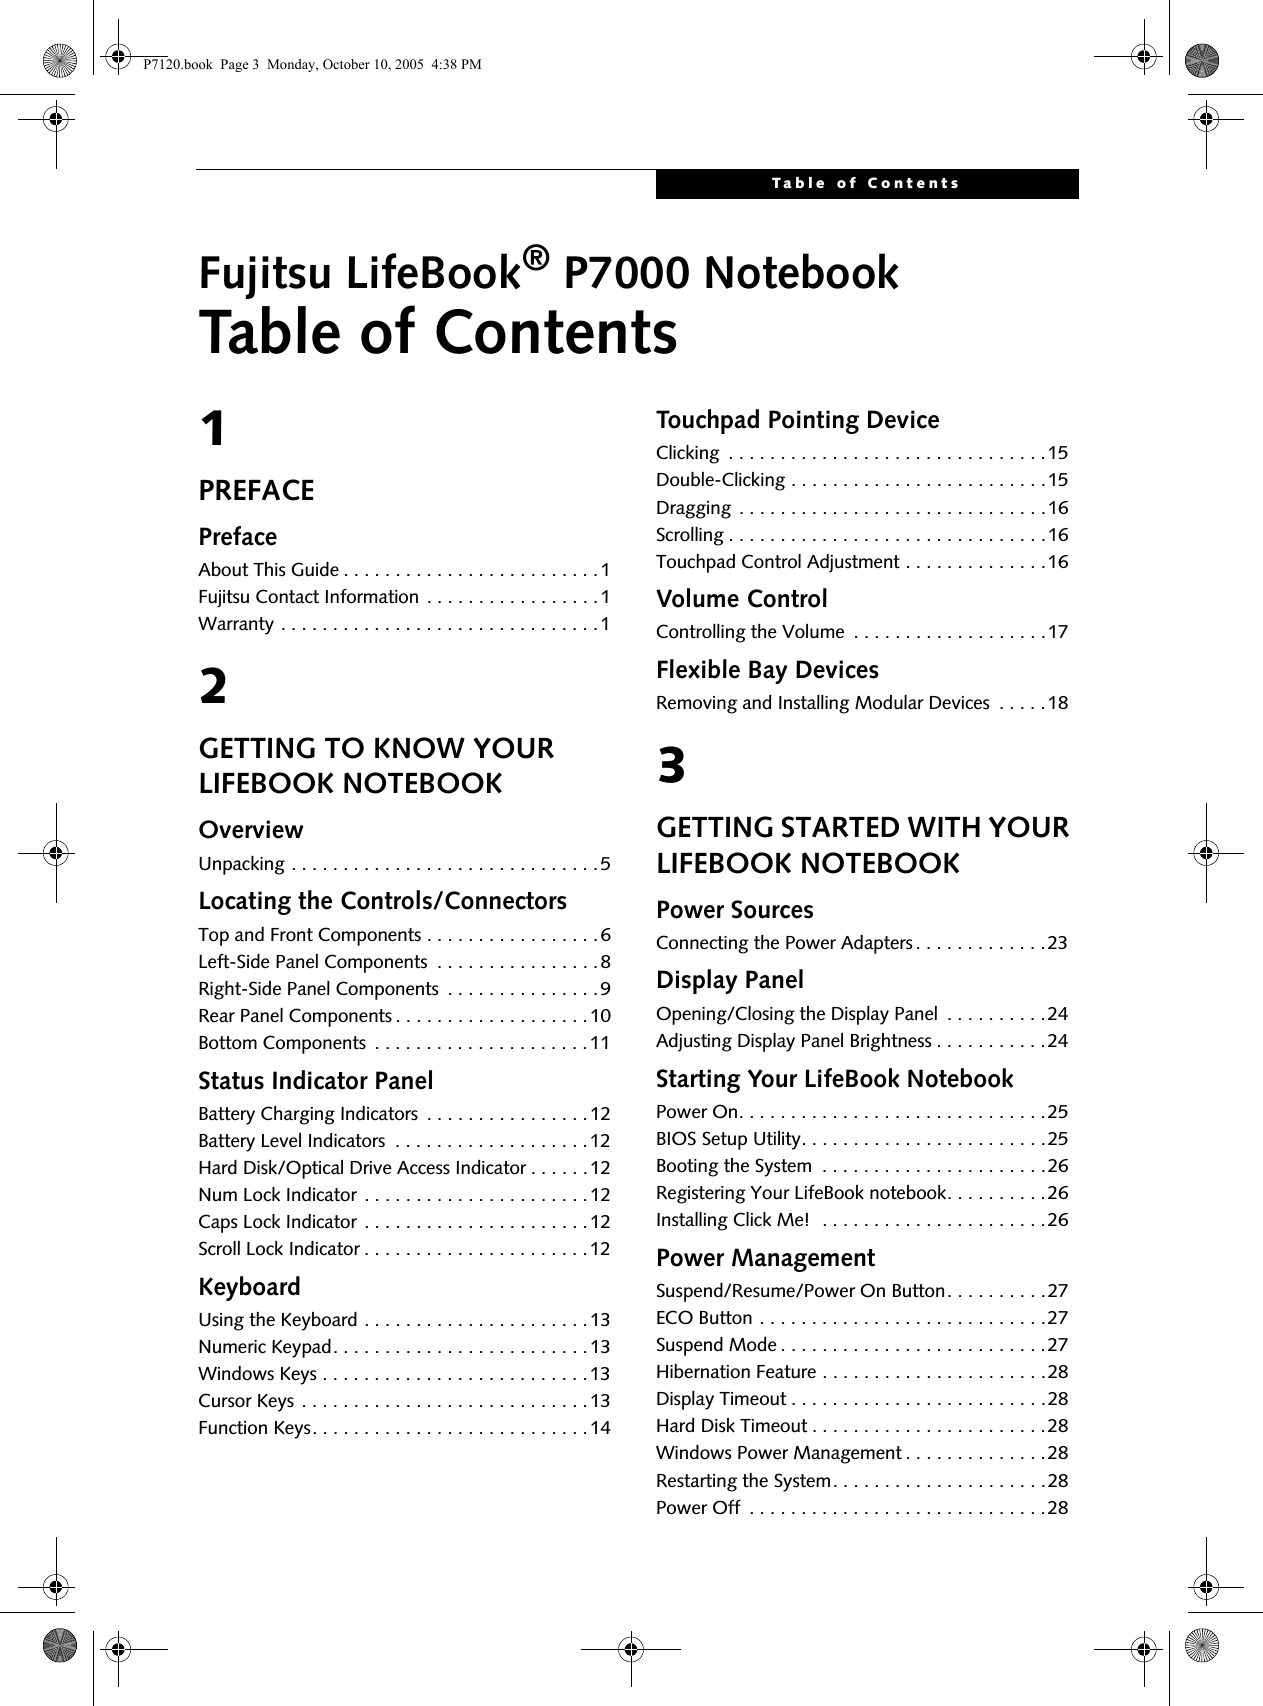 Table of ContentsFujitsu LifeBook® P7000 NotebookTable of Contents1PREFACEPrefaceAbout This Guide . . . . . . . . . . . . . . . . . . . . . . . . .1Fujitsu Contact Information . . . . . . . . . . . . . . . . .1Warranty . . . . . . . . . . . . . . . . . . . . . . . . . . . . . . .12GETTING TO KNOW YOUR LIFEBOOK NOTEBOOKOverviewUnpacking . . . . . . . . . . . . . . . . . . . . . . . . . . . . . .5Locating the Controls/ConnectorsTop and Front Components . . . . . . . . . . . . . . . . .6Left-Side Panel Components  . . . . . . . . . . . . . . . .8Right-Side Panel Components  . . . . . . . . . . . . . . .9Rear Panel Components . . . . . . . . . . . . . . . . . . .10Bottom Components  . . . . . . . . . . . . . . . . . . . . .11Status Indicator PanelBattery Charging Indicators  . . . . . . . . . . . . . . . .12Battery Level Indicators  . . . . . . . . . . . . . . . . . . .12Hard Disk/Optical Drive Access Indicator . . . . . .12Num Lock Indicator . . . . . . . . . . . . . . . . . . . . . .12Caps Lock Indicator . . . . . . . . . . . . . . . . . . . . . .12Scroll Lock Indicator . . . . . . . . . . . . . . . . . . . . . .12KeyboardUsing the Keyboard . . . . . . . . . . . . . . . . . . . . . .13Numeric Keypad. . . . . . . . . . . . . . . . . . . . . . . . .13Windows Keys . . . . . . . . . . . . . . . . . . . . . . . . . .13Cursor Keys . . . . . . . . . . . . . . . . . . . . . . . . . . . .13Function Keys. . . . . . . . . . . . . . . . . . . . . . . . . . .14Touchpad Pointing DeviceClicking  . . . . . . . . . . . . . . . . . . . . . . . . . . . . . . .15Double-Clicking . . . . . . . . . . . . . . . . . . . . . . . . .15Dragging  . . . . . . . . . . . . . . . . . . . . . . . . . . . . . .16Scrolling . . . . . . . . . . . . . . . . . . . . . . . . . . . . . . .16Touchpad Control Adjustment . . . . . . . . . . . . . .16Volume ControlControlling the Volume  . . . . . . . . . . . . . . . . . . .17Flexible Bay DevicesRemoving and Installing Modular Devices  . . . . .183GETTING STARTED WITH YOUR LIFEBOOK NOTEBOOKPower SourcesConnecting the Power Adapters . . . . . . . . . . . . .23Display PanelOpening/Closing the Display Panel  . . . . . . . . . .24Adjusting Display Panel Brightness . . . . . . . . . . .24Starting Your LifeBook NotebookPower On. . . . . . . . . . . . . . . . . . . . . . . . . . . . . .25BIOS Setup Utility. . . . . . . . . . . . . . . . . . . . . . . .25Booting the System  . . . . . . . . . . . . . . . . . . . . . .26Registering Your LifeBook notebook. . . . . . . . . .26Installing Click Me!  . . . . . . . . . . . . . . . . . . . . . .26Power ManagementSuspend/Resume/Power On Button. . . . . . . . . .27ECO Button . . . . . . . . . . . . . . . . . . . . . . . . . . . .27Suspend Mode . . . . . . . . . . . . . . . . . . . . . . . . . .27Hibernation Feature . . . . . . . . . . . . . . . . . . . . . .28Display Timeout . . . . . . . . . . . . . . . . . . . . . . . . .28Hard Disk Timeout . . . . . . . . . . . . . . . . . . . . . . .28Windows Power Management . . . . . . . . . . . . . .28Restarting the System. . . . . . . . . . . . . . . . . . . . .28Power Off  . . . . . . . . . . . . . . . . . . . . . . . . . . . . .28P7120.book  Page 3  Monday, October 10, 2005  4:38 PM